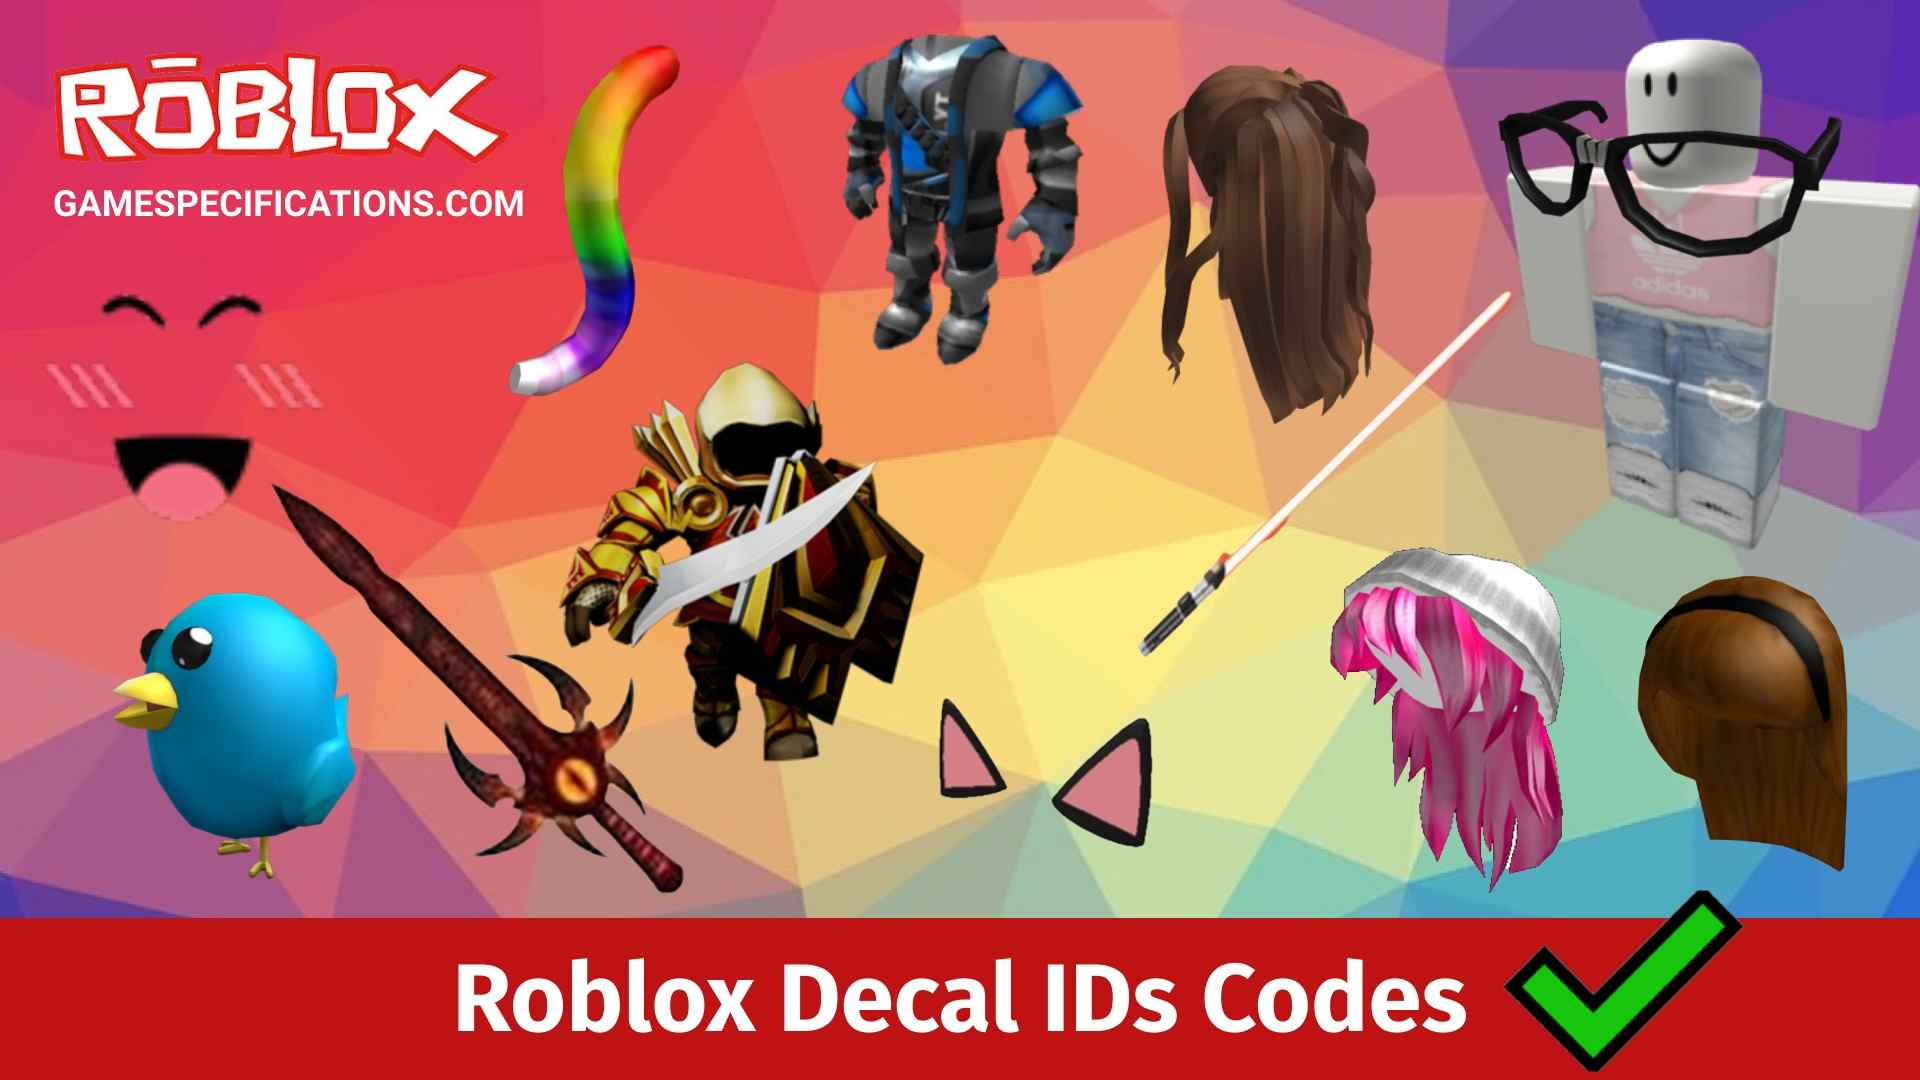 70 Popular Roblox Decal IDs Codes